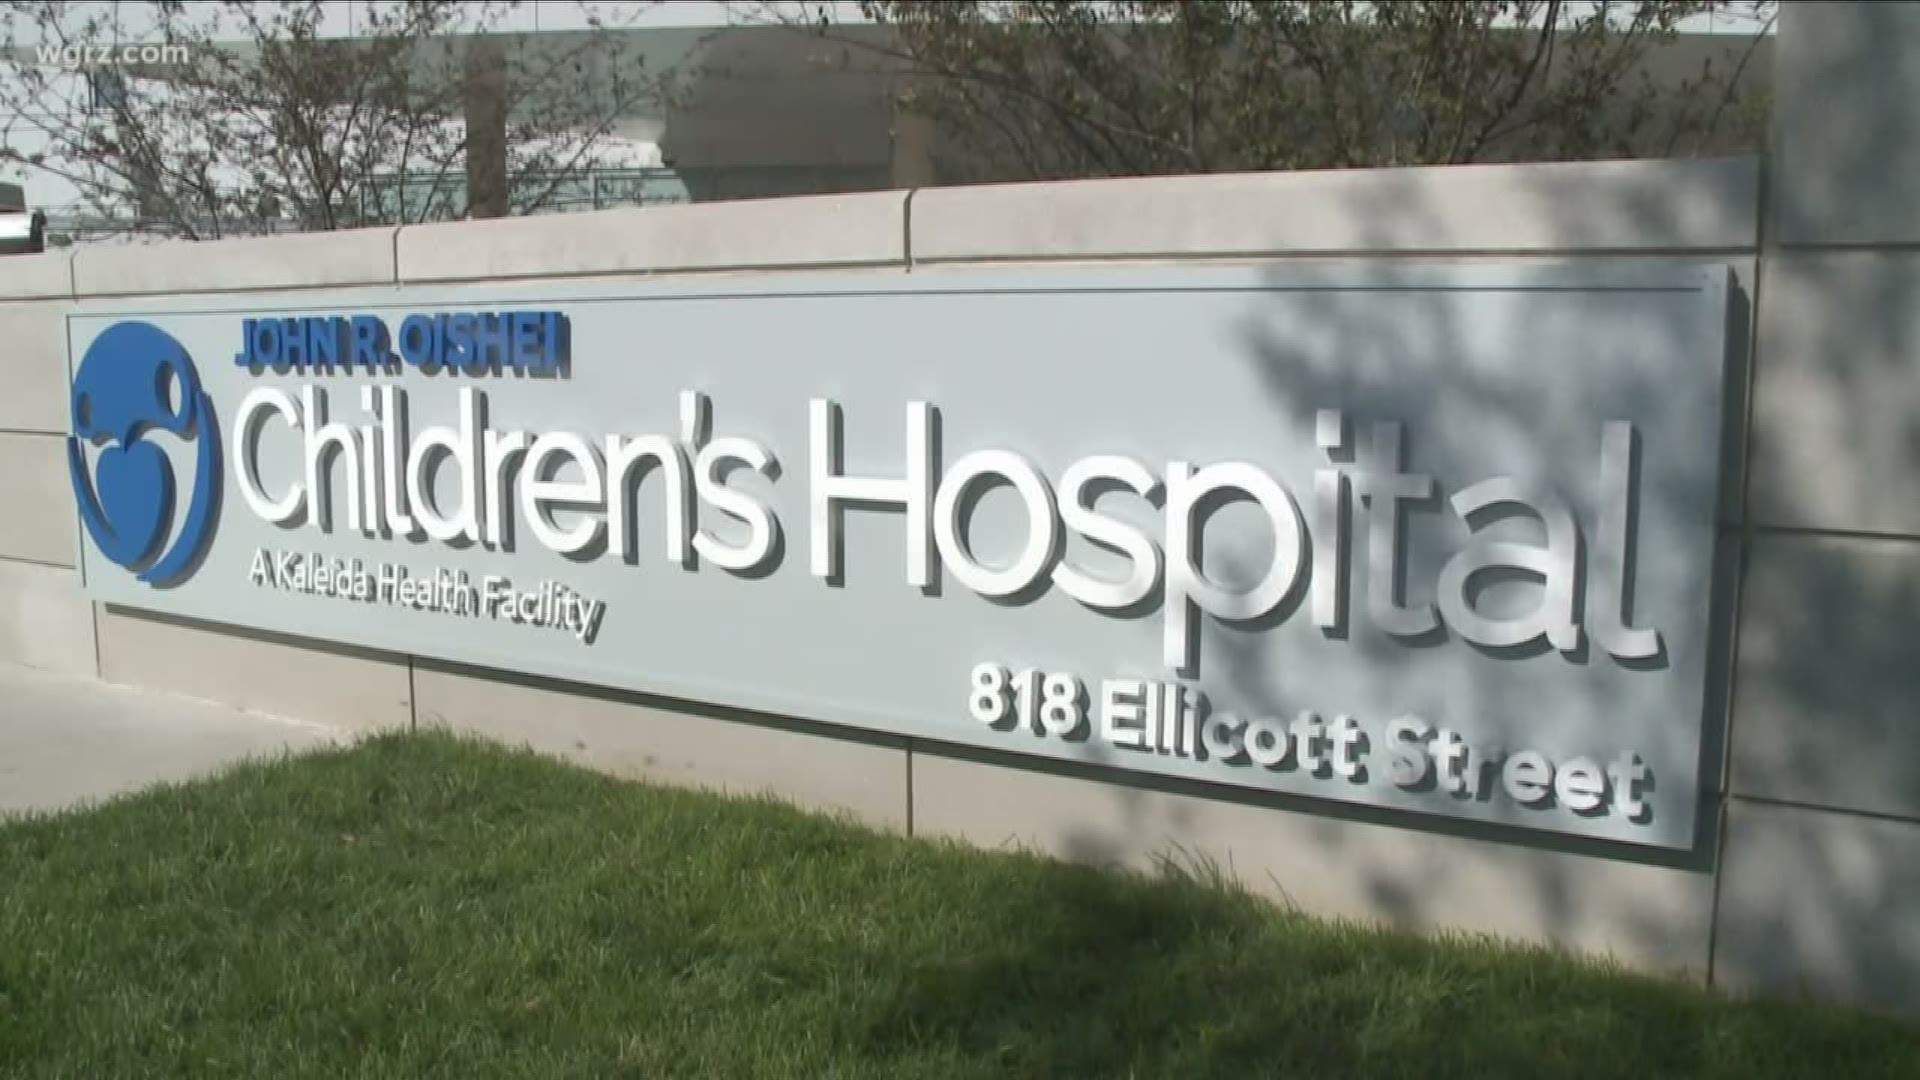 The hospital announced new rules for visitors today... banning visitors who are sick... under the age of 5... and under the age of 14 except in special circumstances